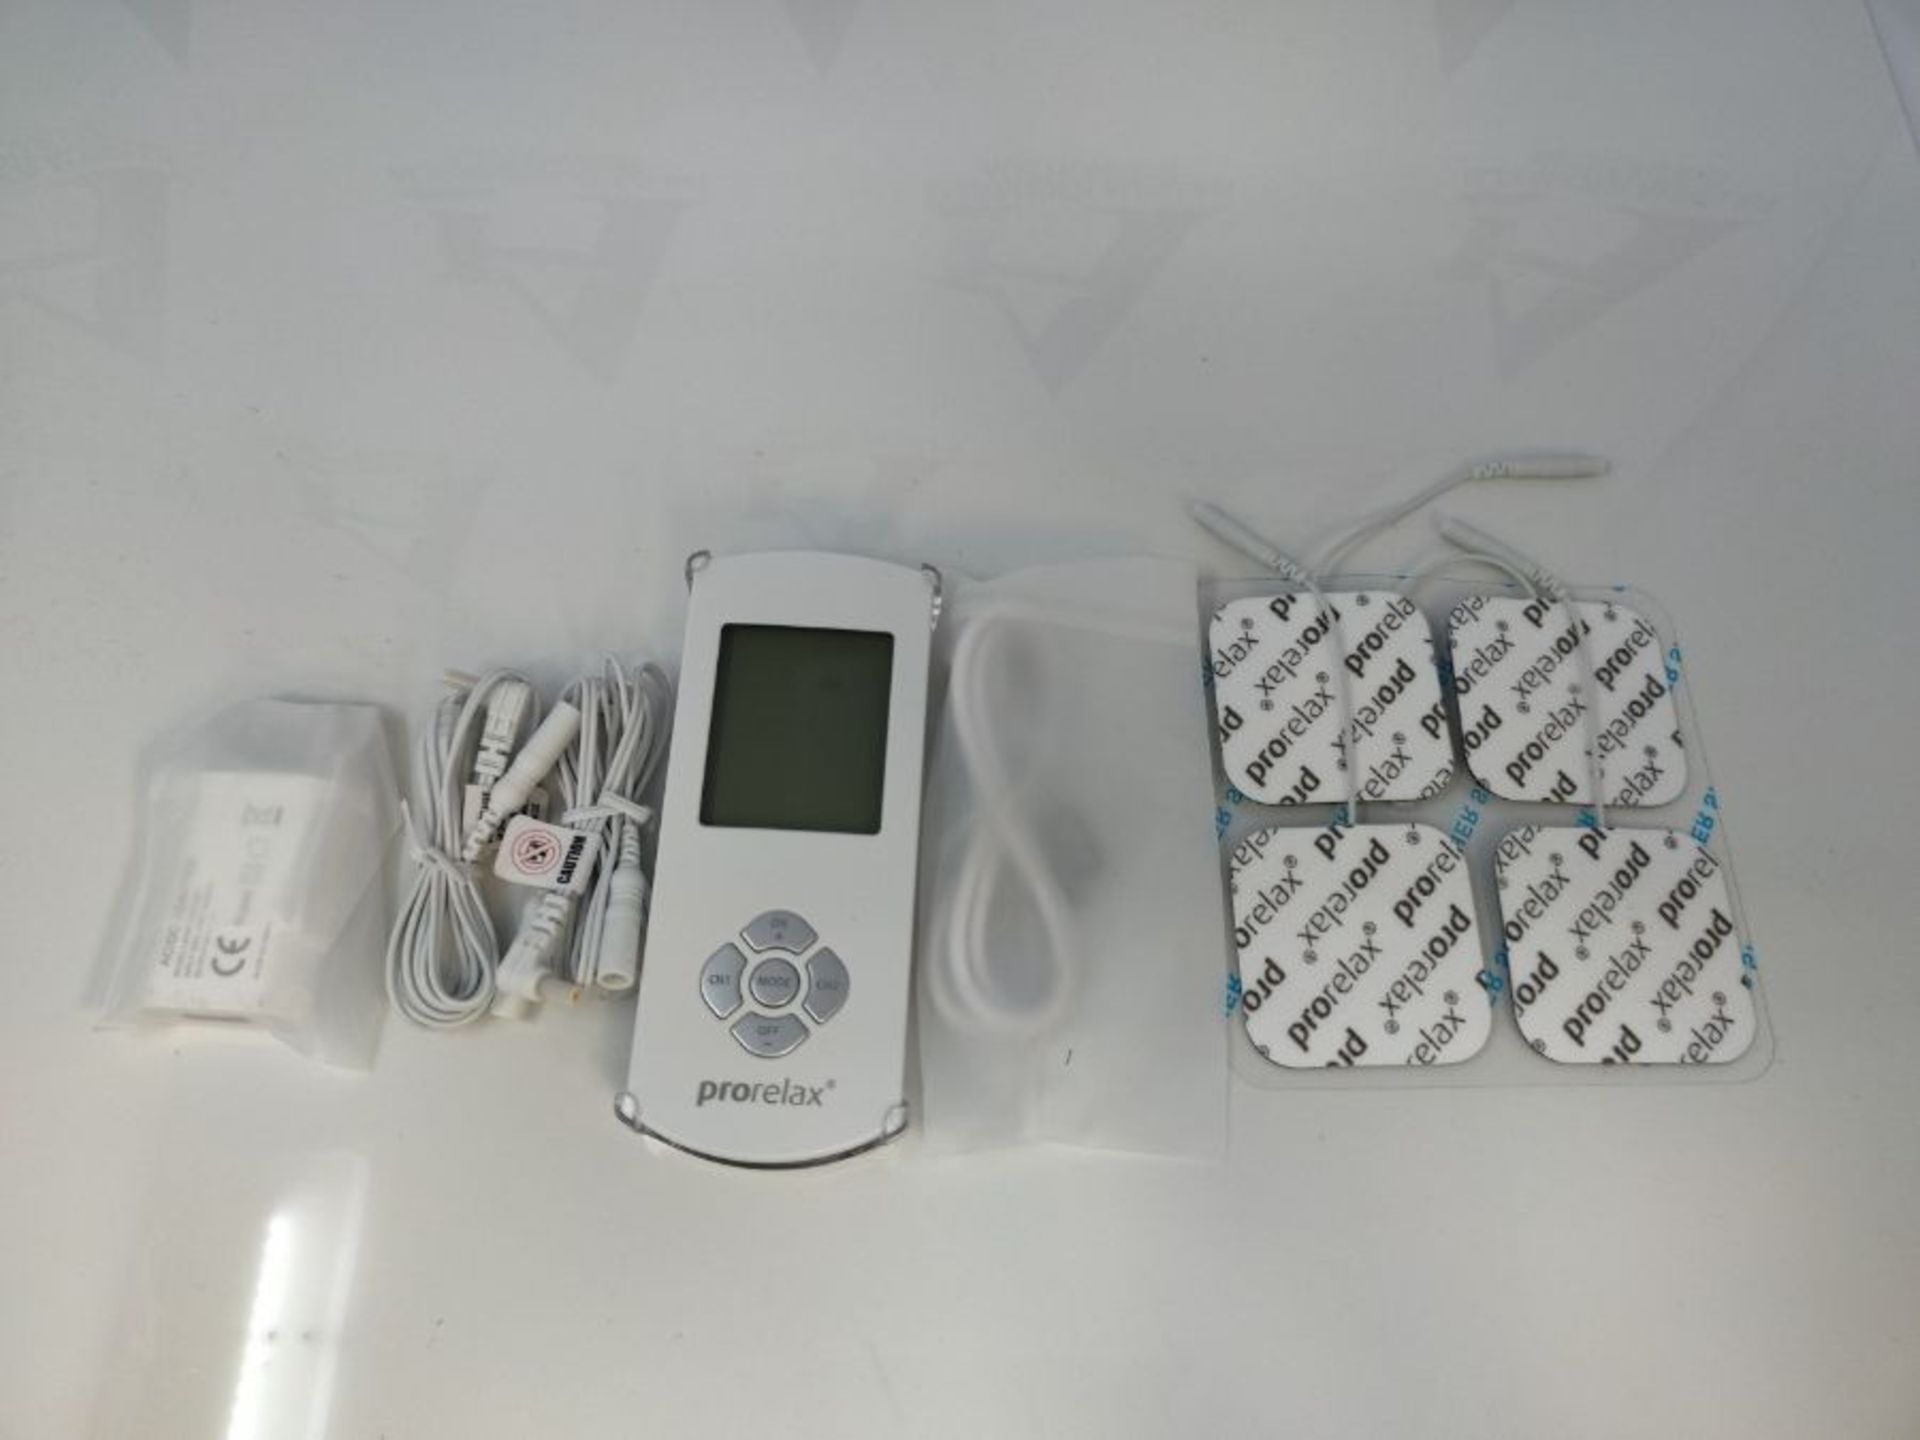 prorelax TENS/EMS Duo Comfort | electrostimulation device | 2 therapies with one devic - Image 3 of 3